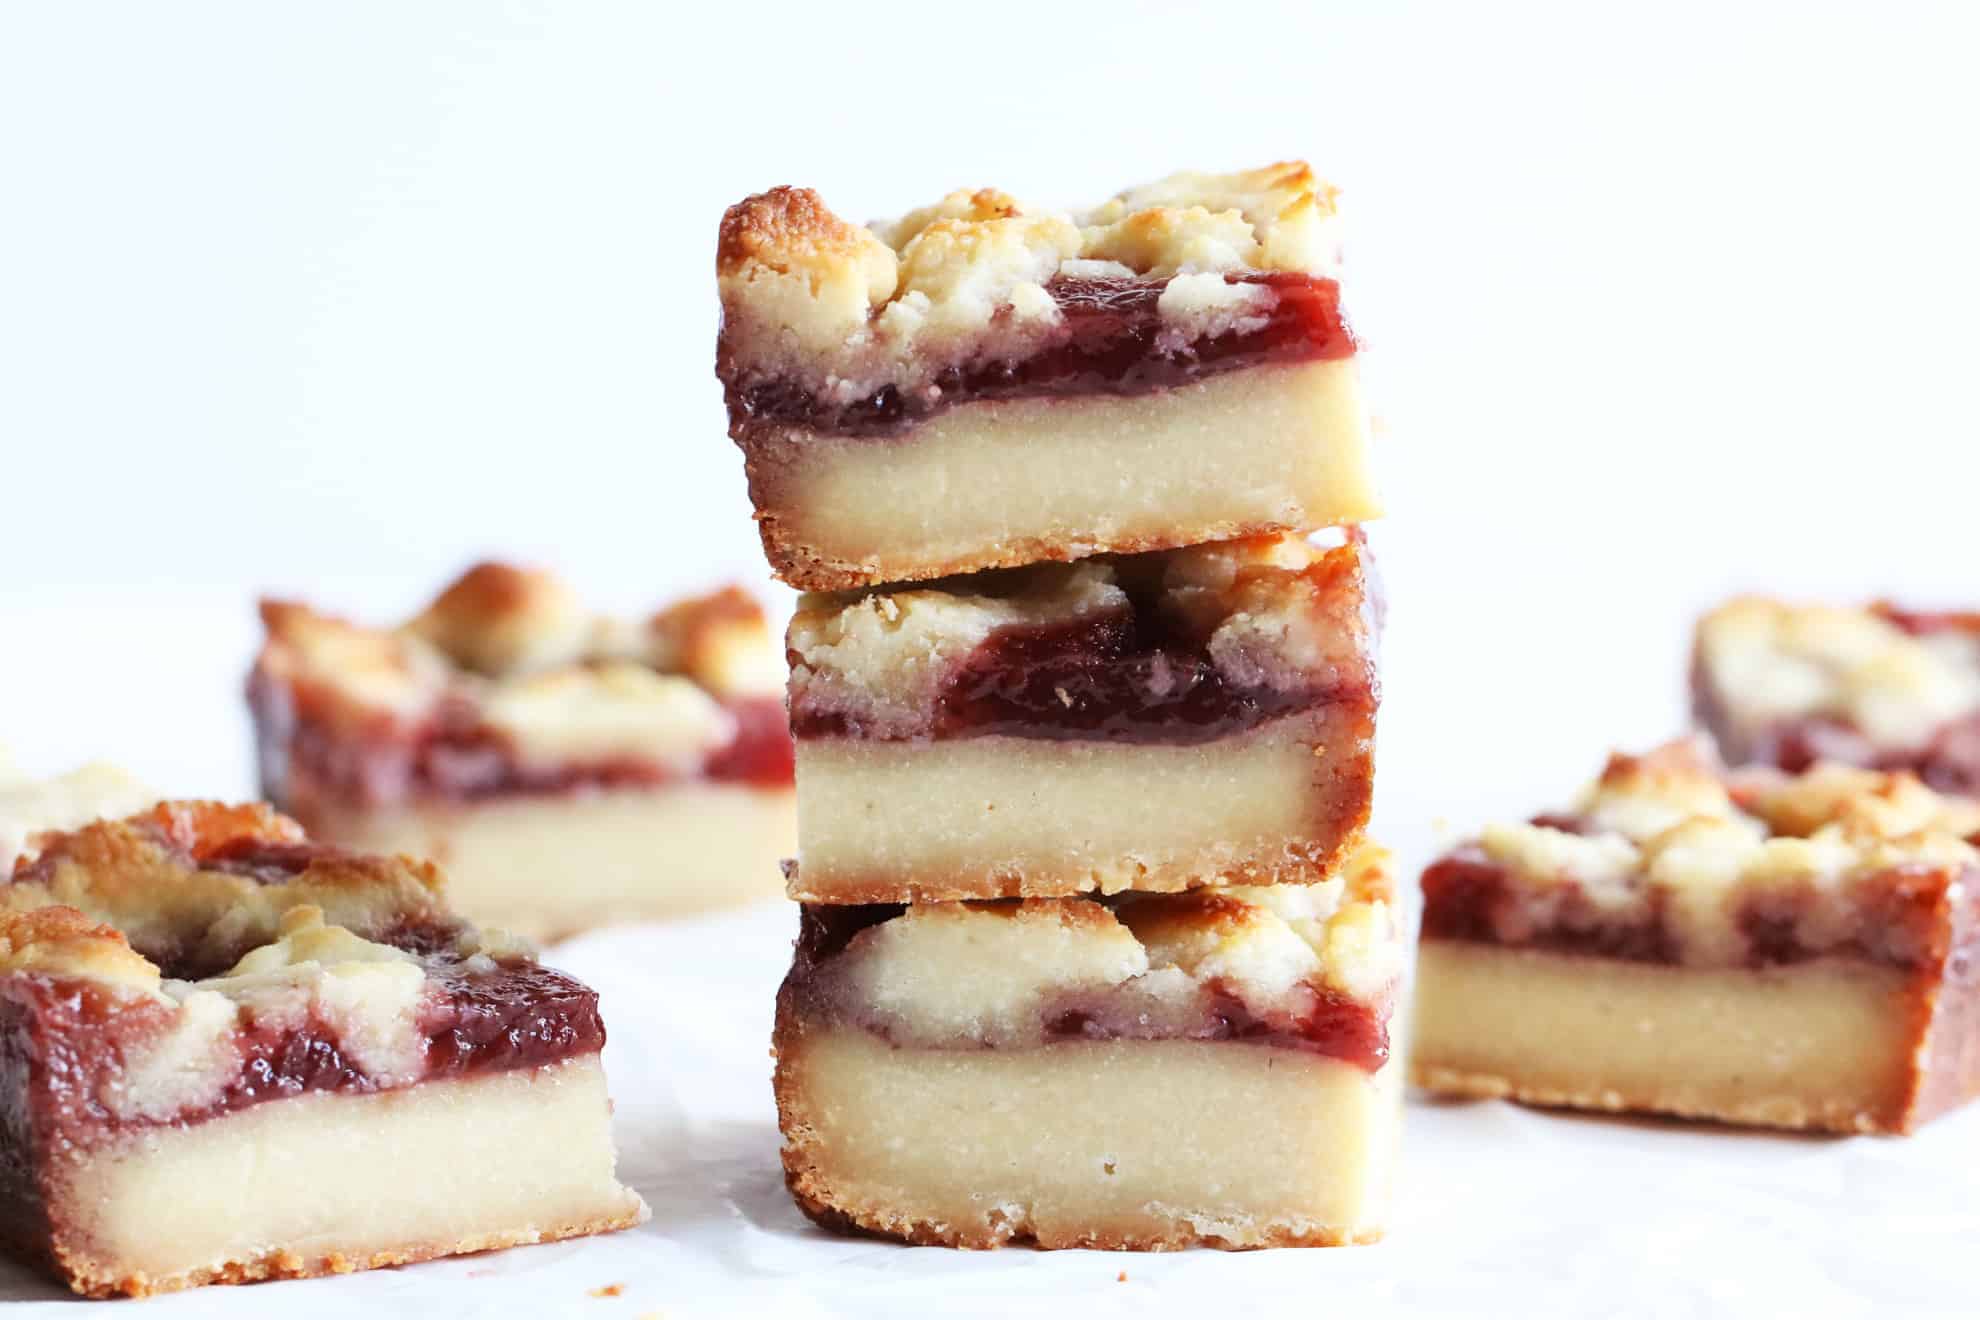 This is a side view of a stack of three Strawberry Crumble Bars. The stack sits on a white counter with more bars blurred to the side and in the background.